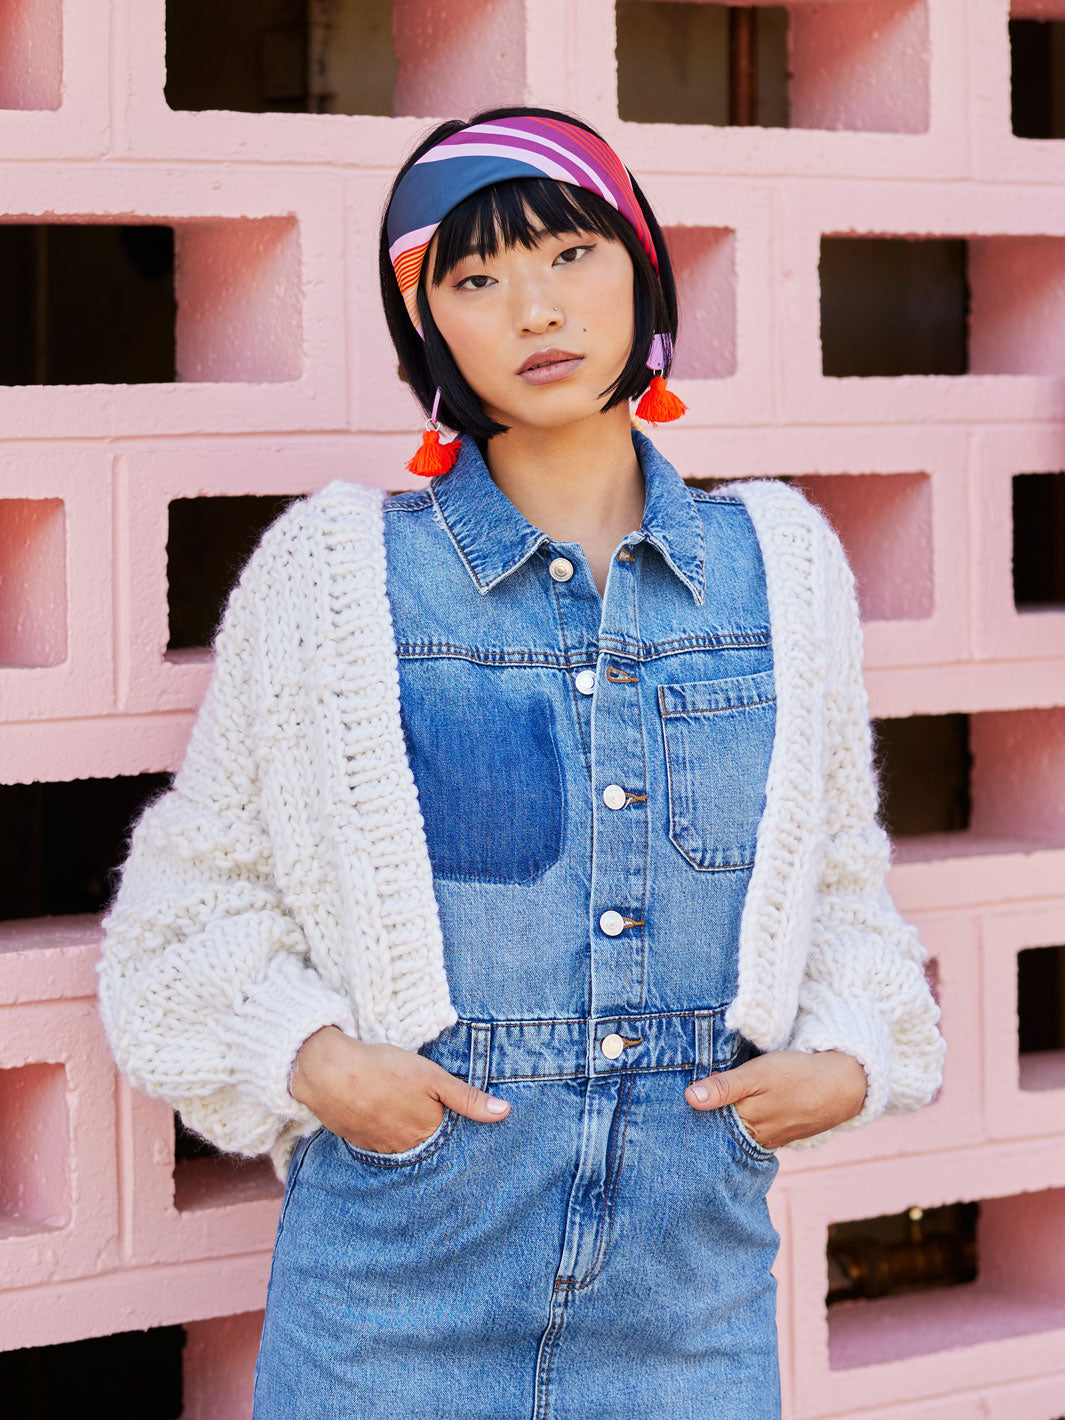 Woman standing in front of pink wall waring a denim dress and white chunky knitted cardigan